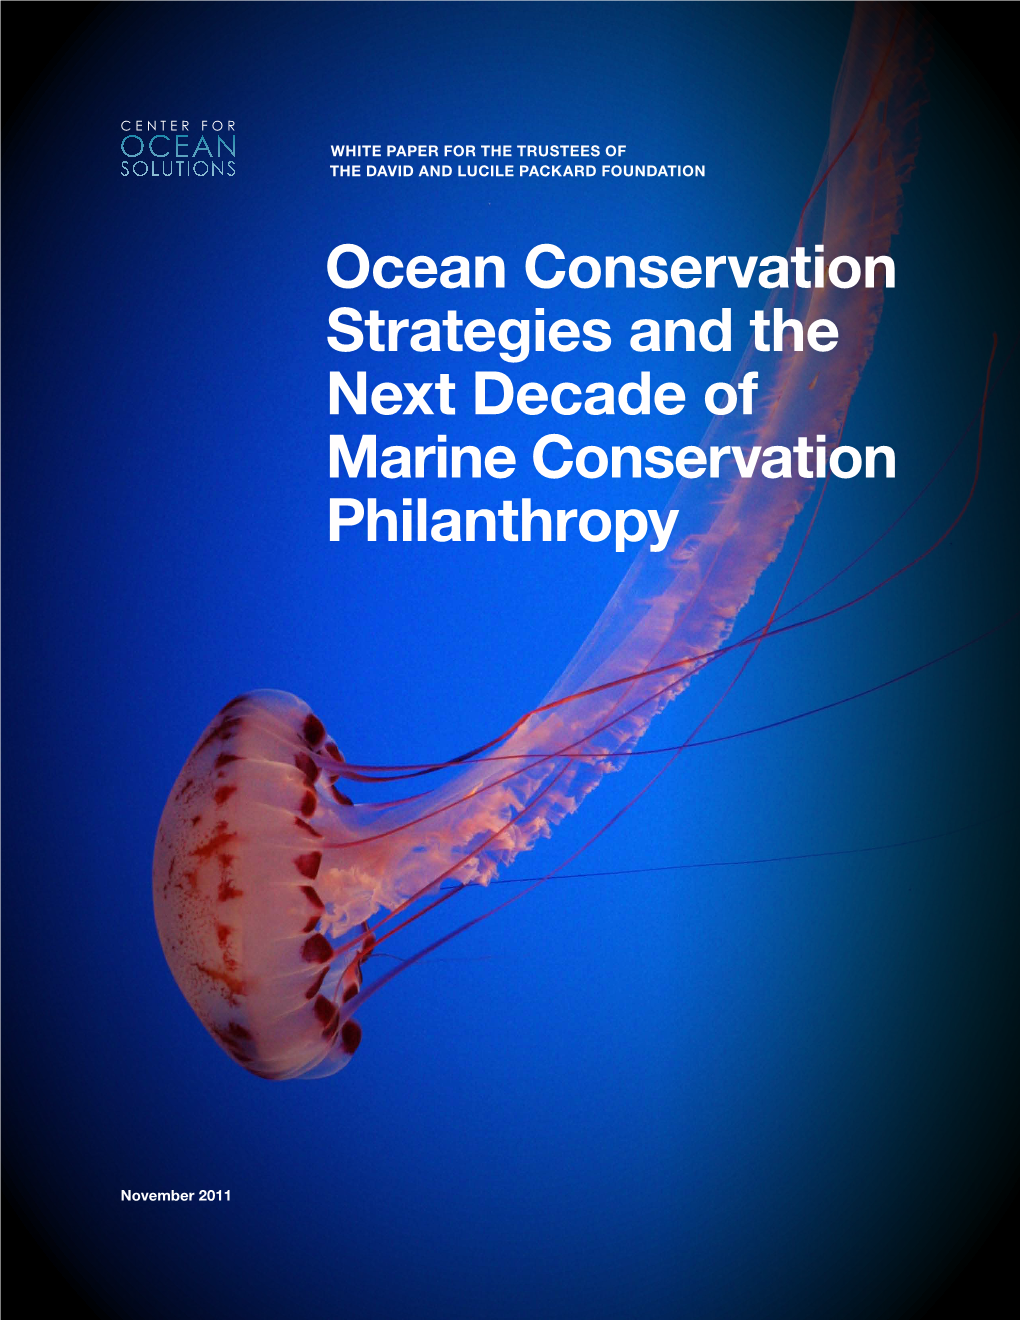 Ocean Conservation Strategies and the Next Decade of Marine Conservation Philanthropy